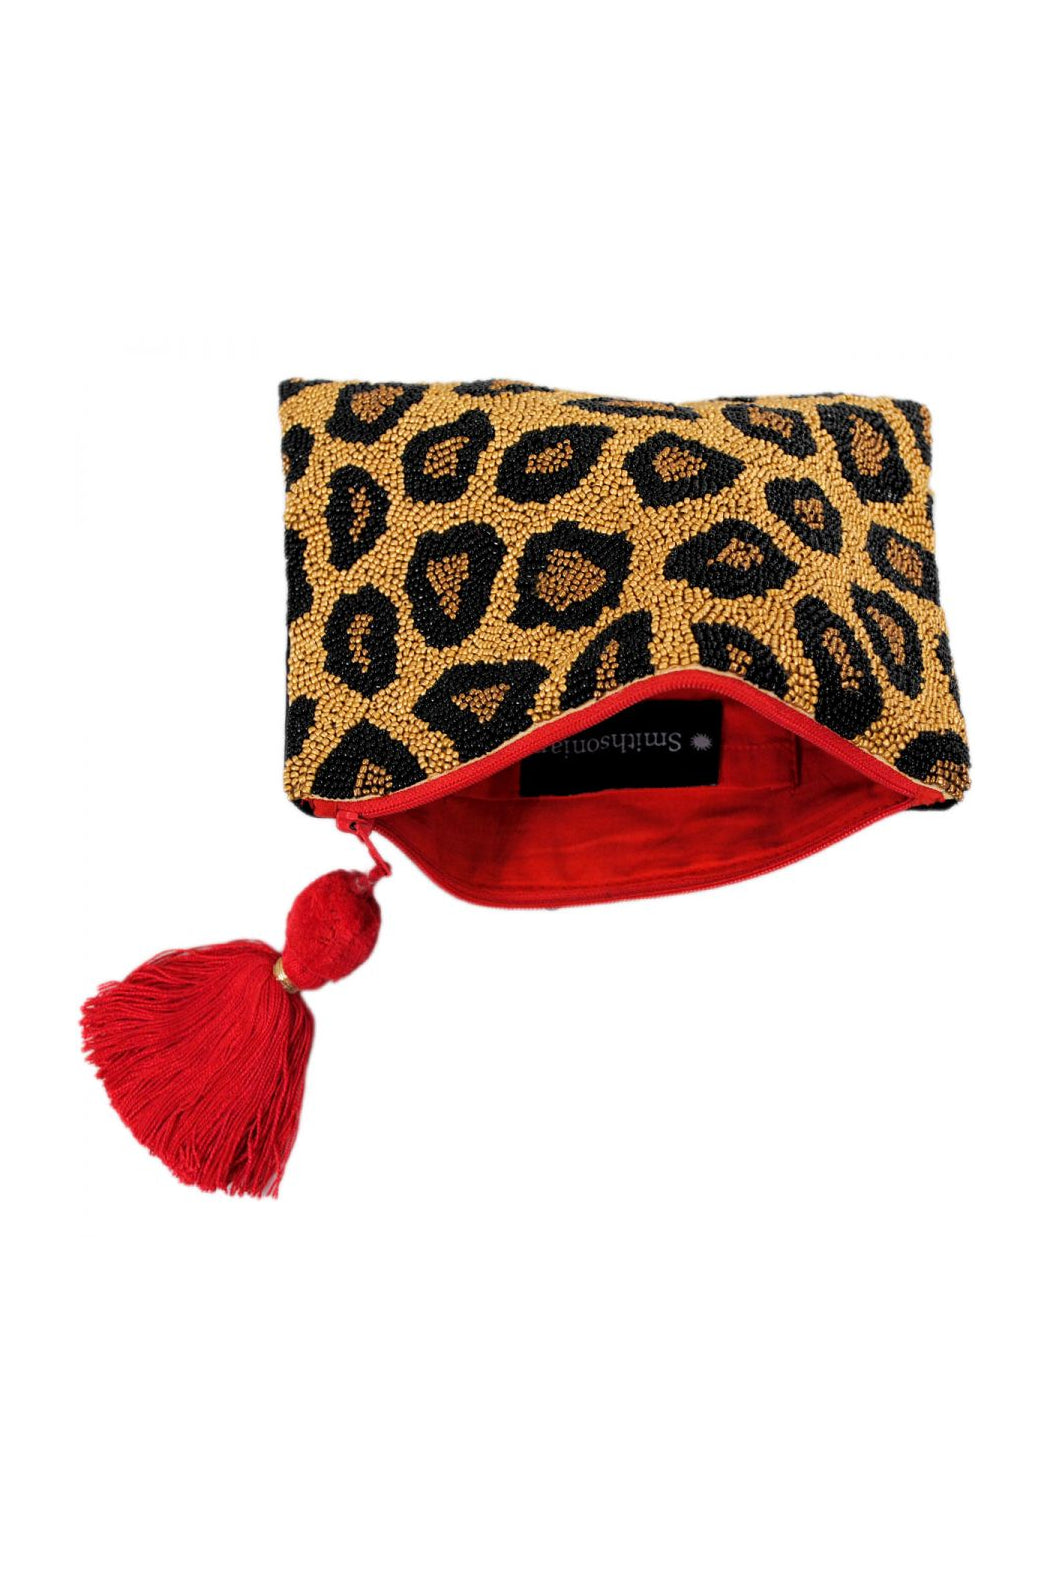 Leopard Beaded Clutch - Embellish Your Life 